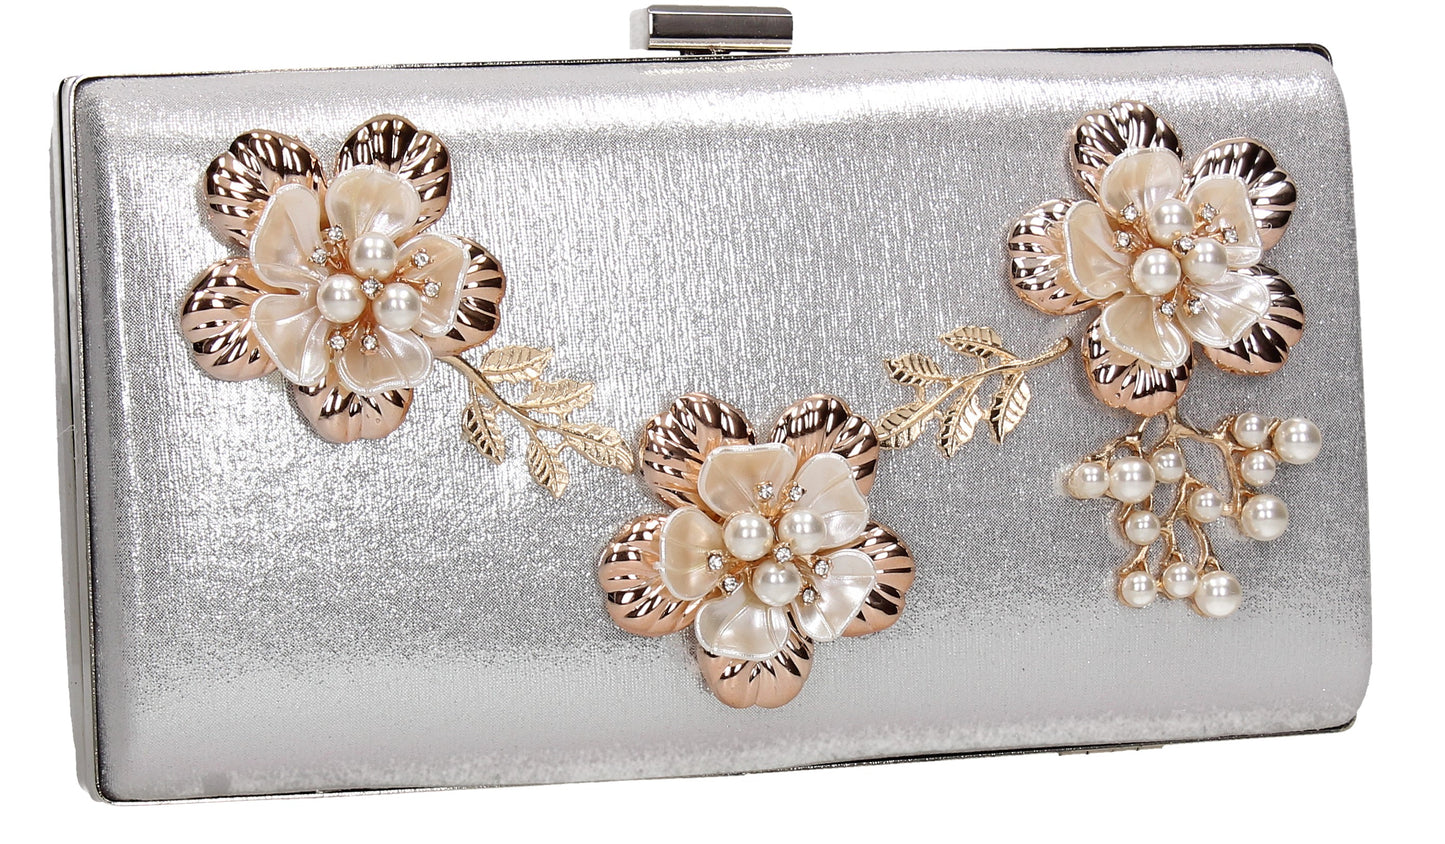 SWANKYSWANS Payton Floral Detail Clutch Bag Silver Cute Cheap Clutch Bag For Weddings School and Work